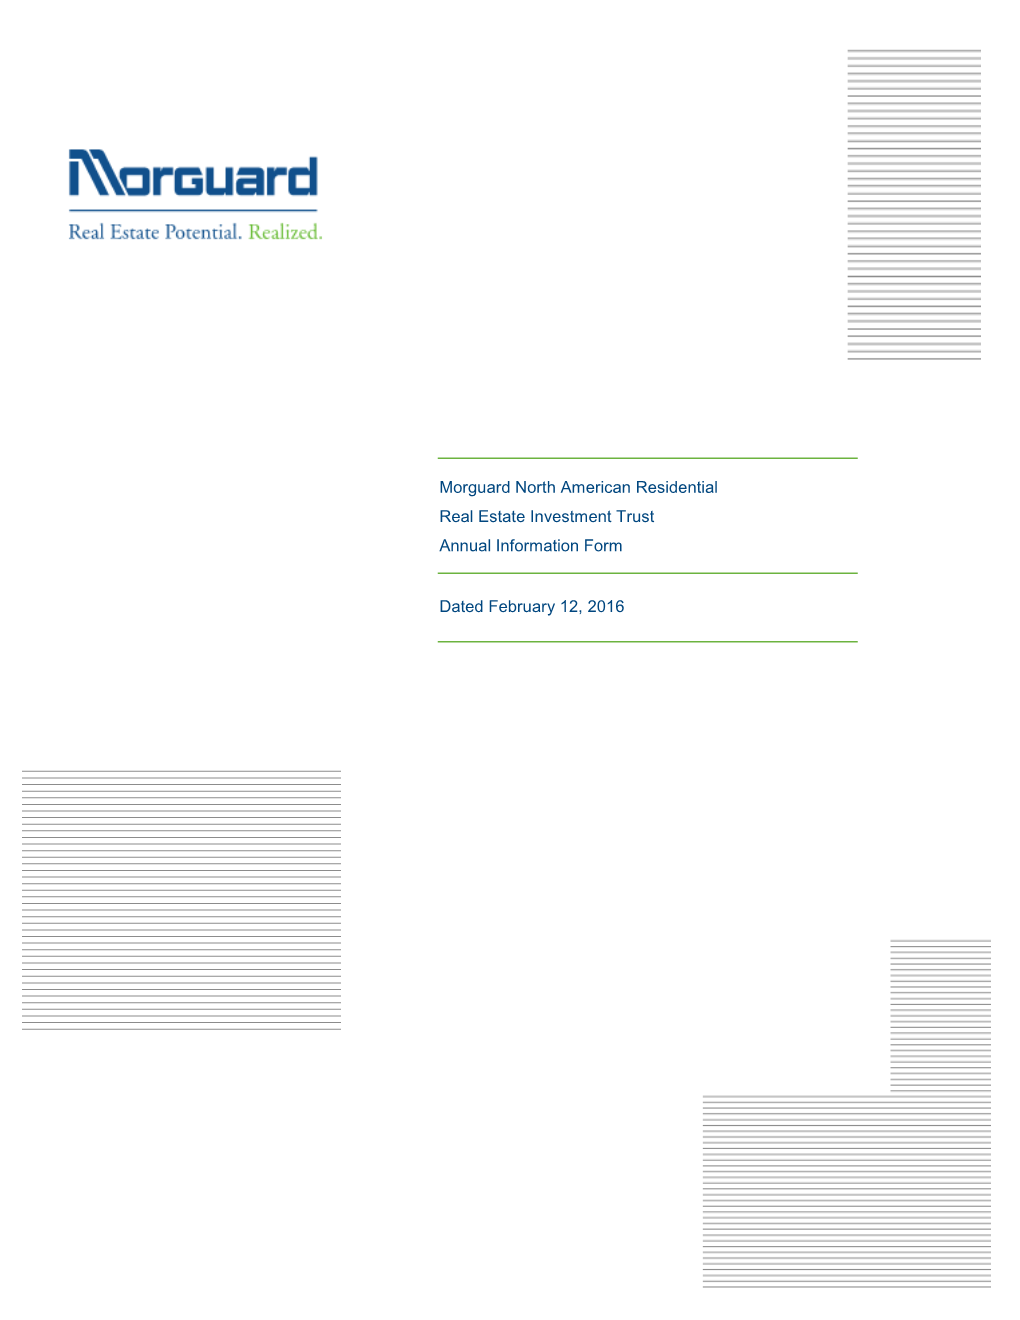 Morguard North American Residential Real Estate Investment Trust Annual Information Form